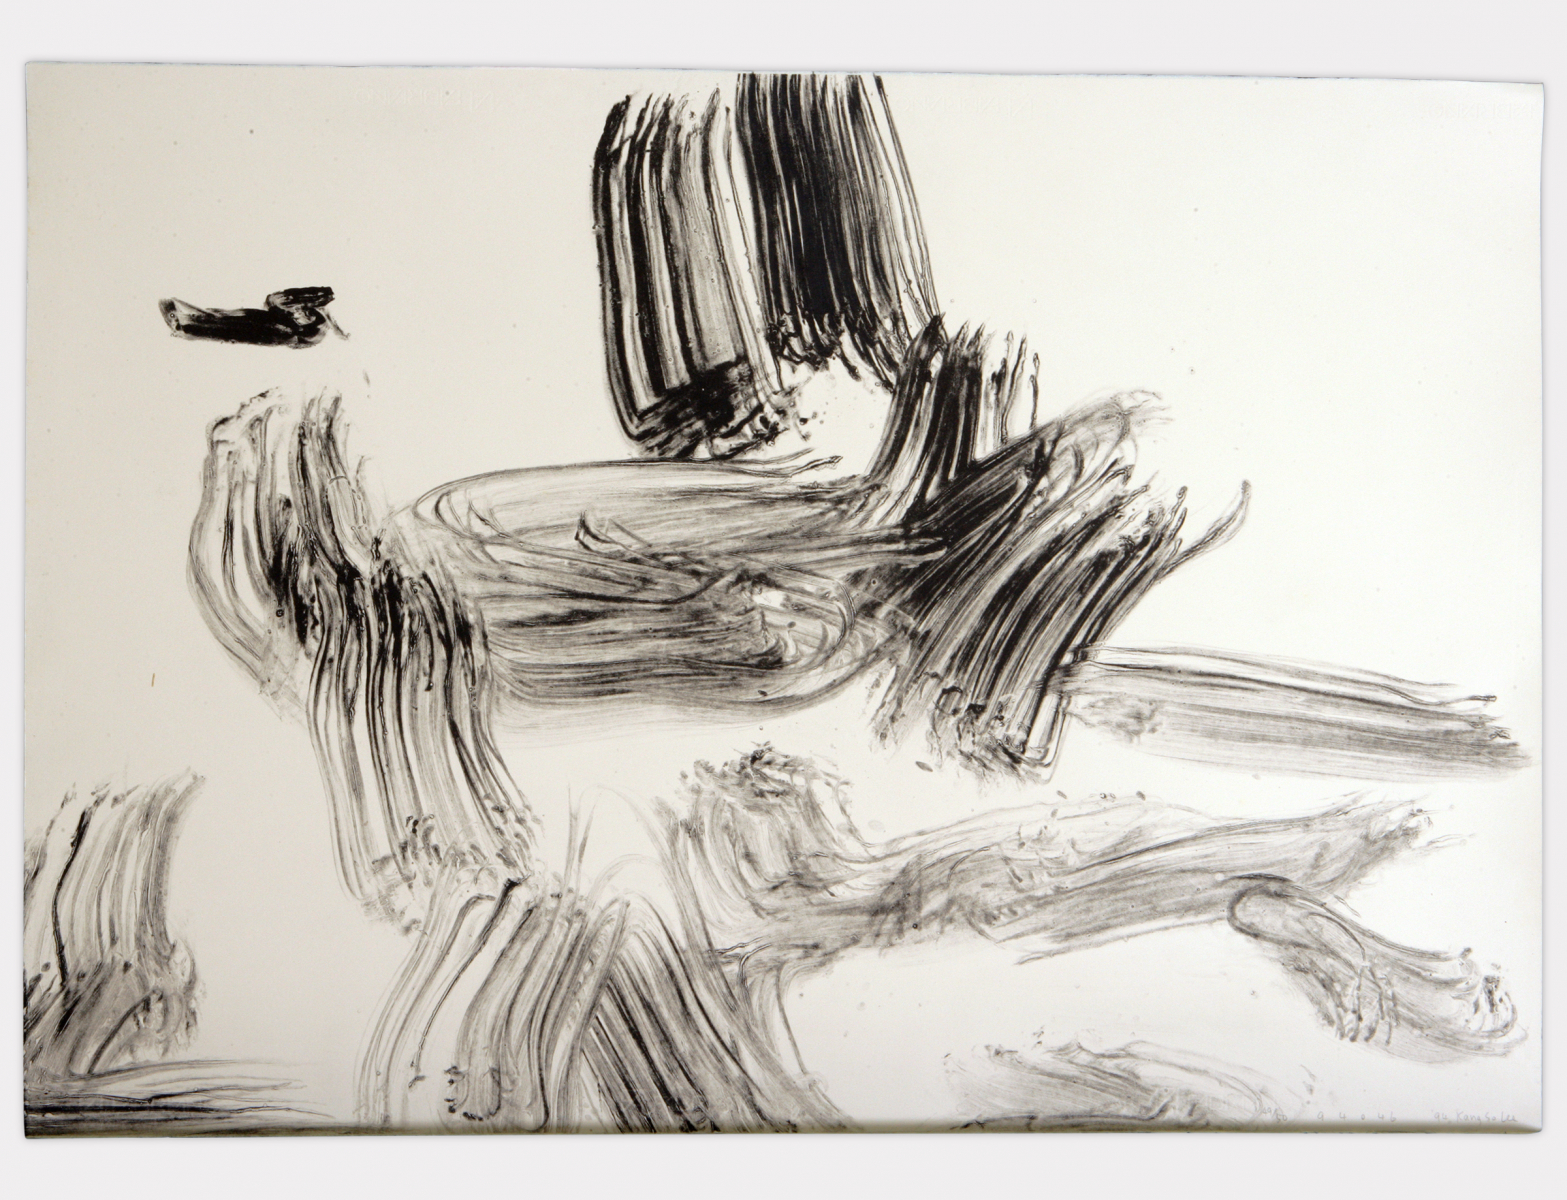 Untitled-94046, 1994, Lithography, 100x70cm